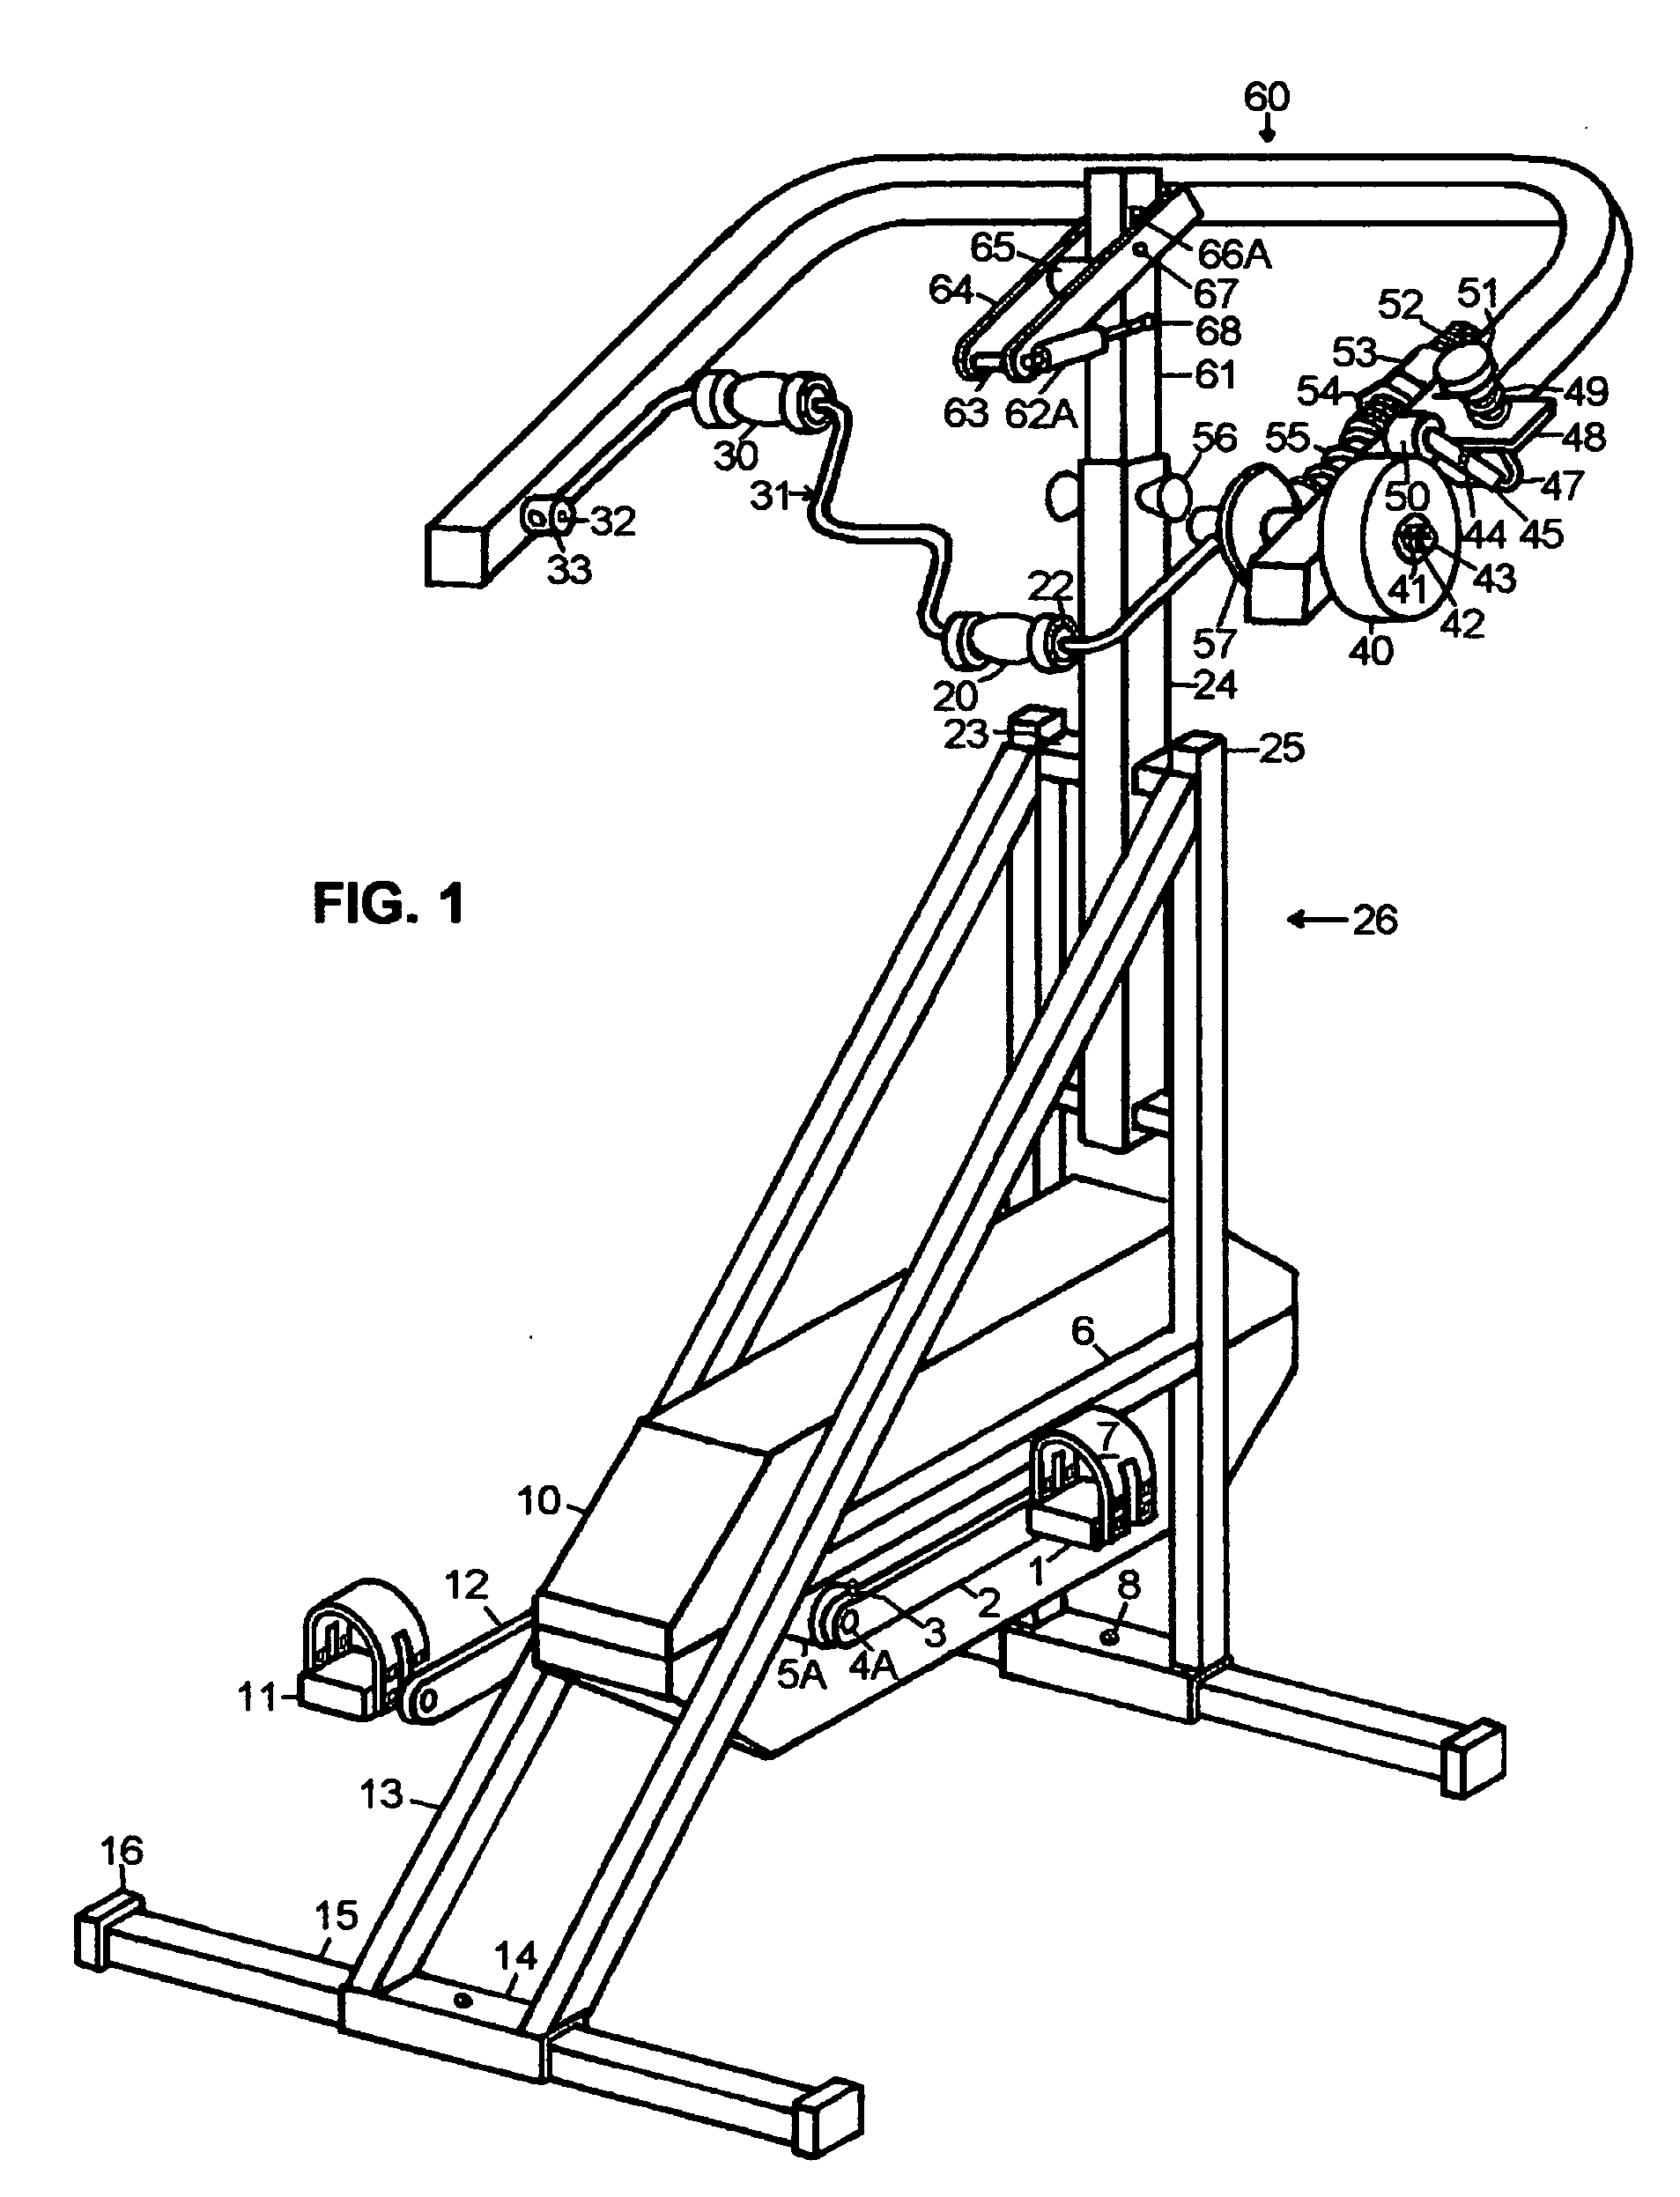 Vertical total body exercise apparatus